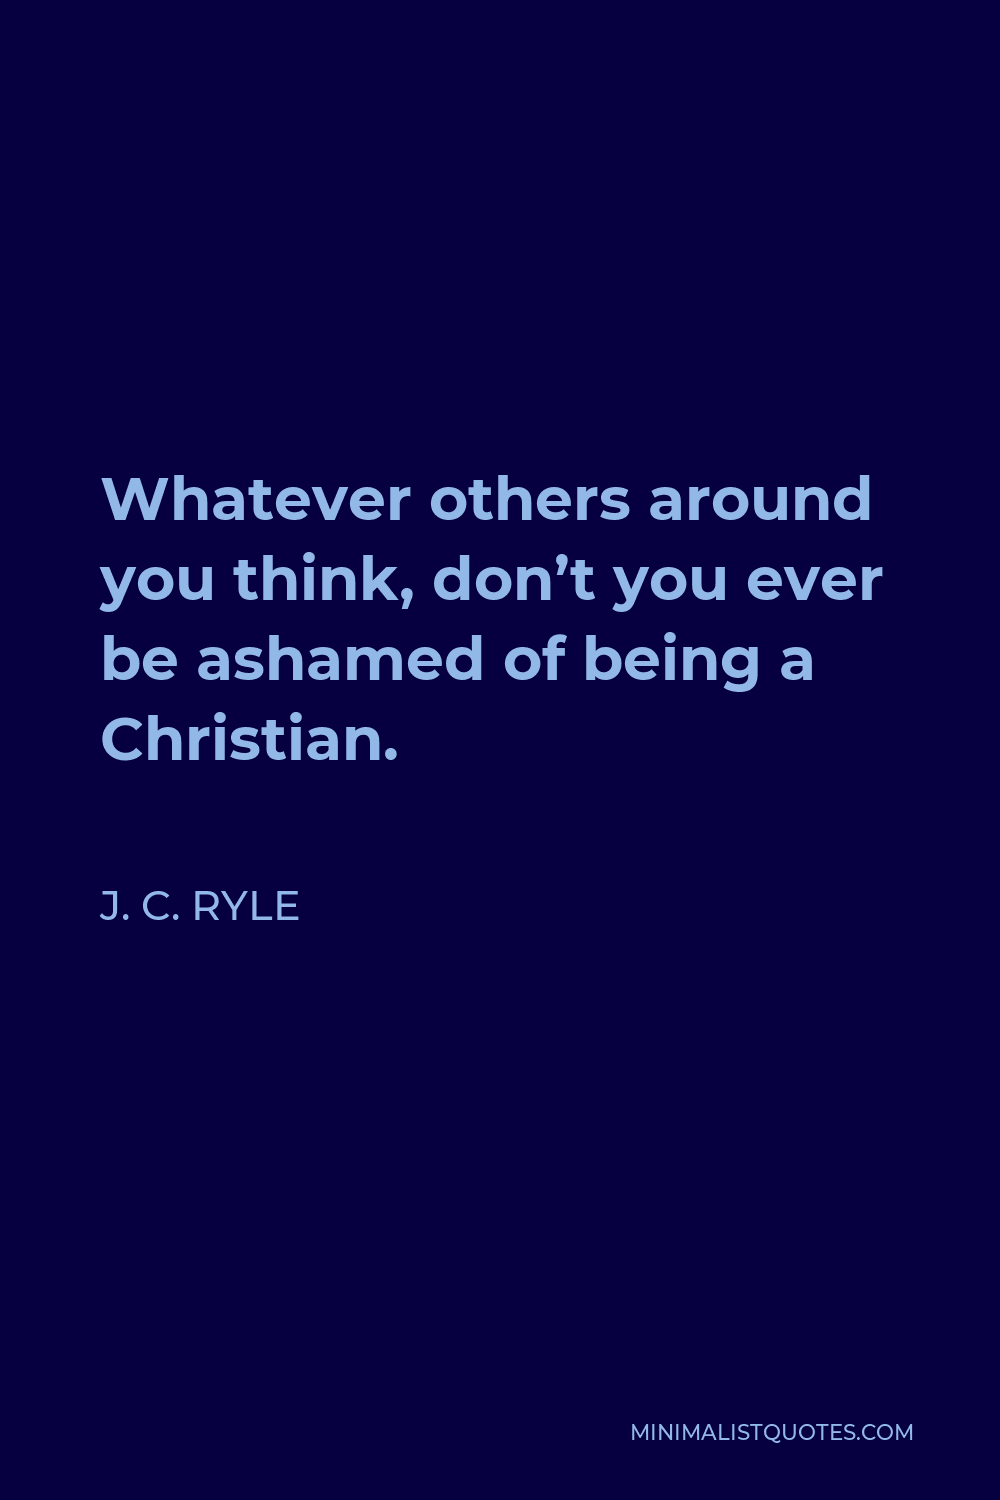 J. C. Ryle Quote - Whatever others around you think, don’t you ever be ashamed of being a Christian.